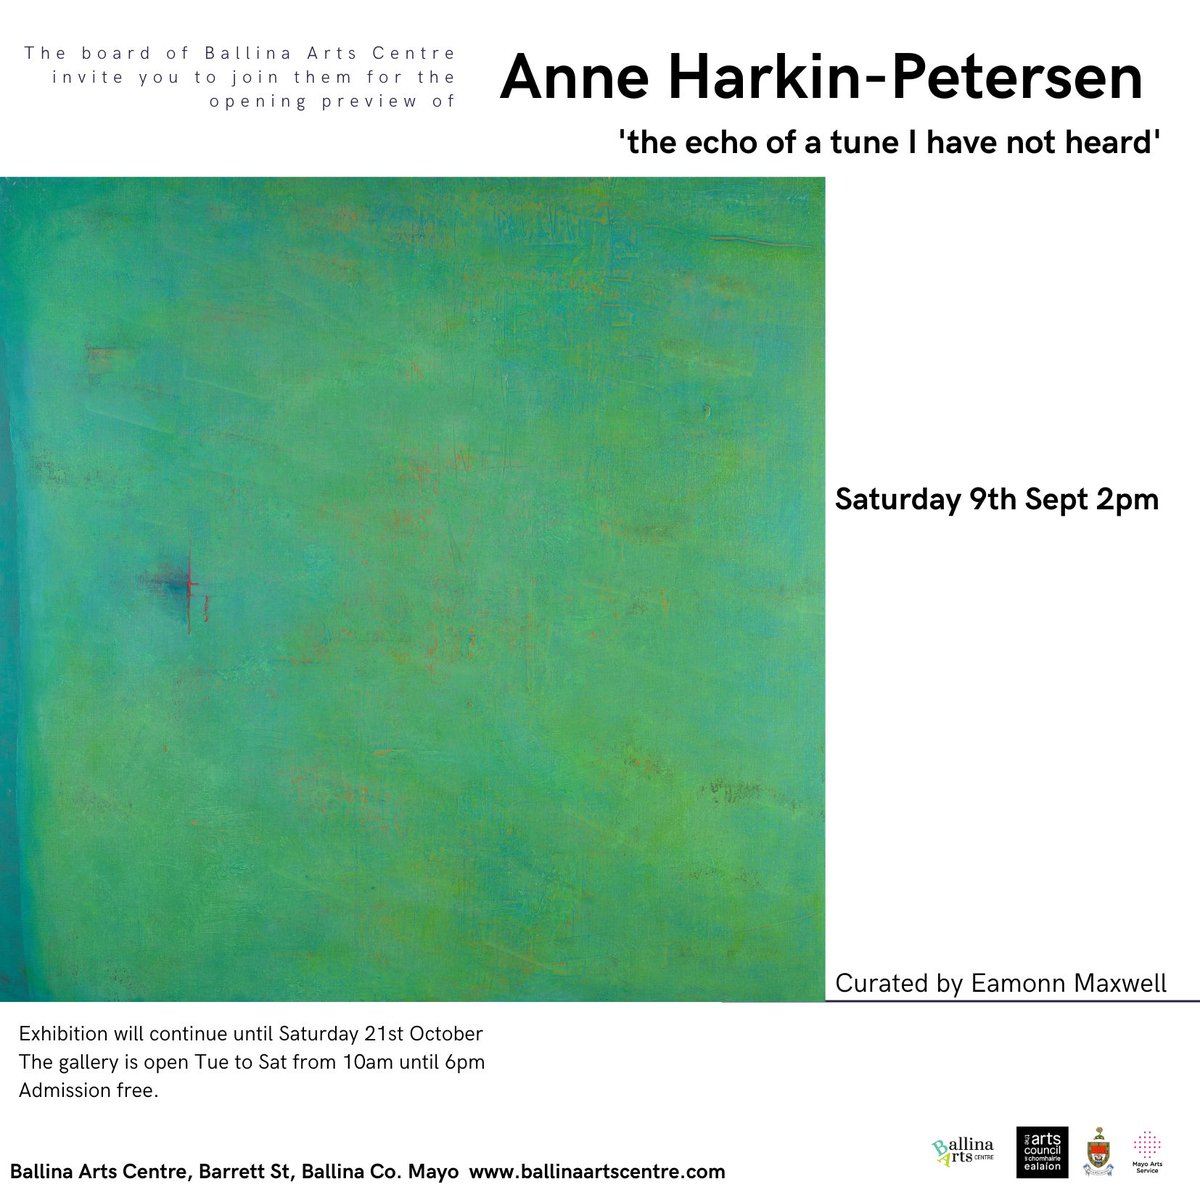 Anne Harkin - Petersen's exhibition entitled 'the echo of a tune I have not heard' will open on Saturday September 09th at 2pm in Ballina Arts Centre. The exhibition run until October 21st. @ballinaartscent @MayoDotIE